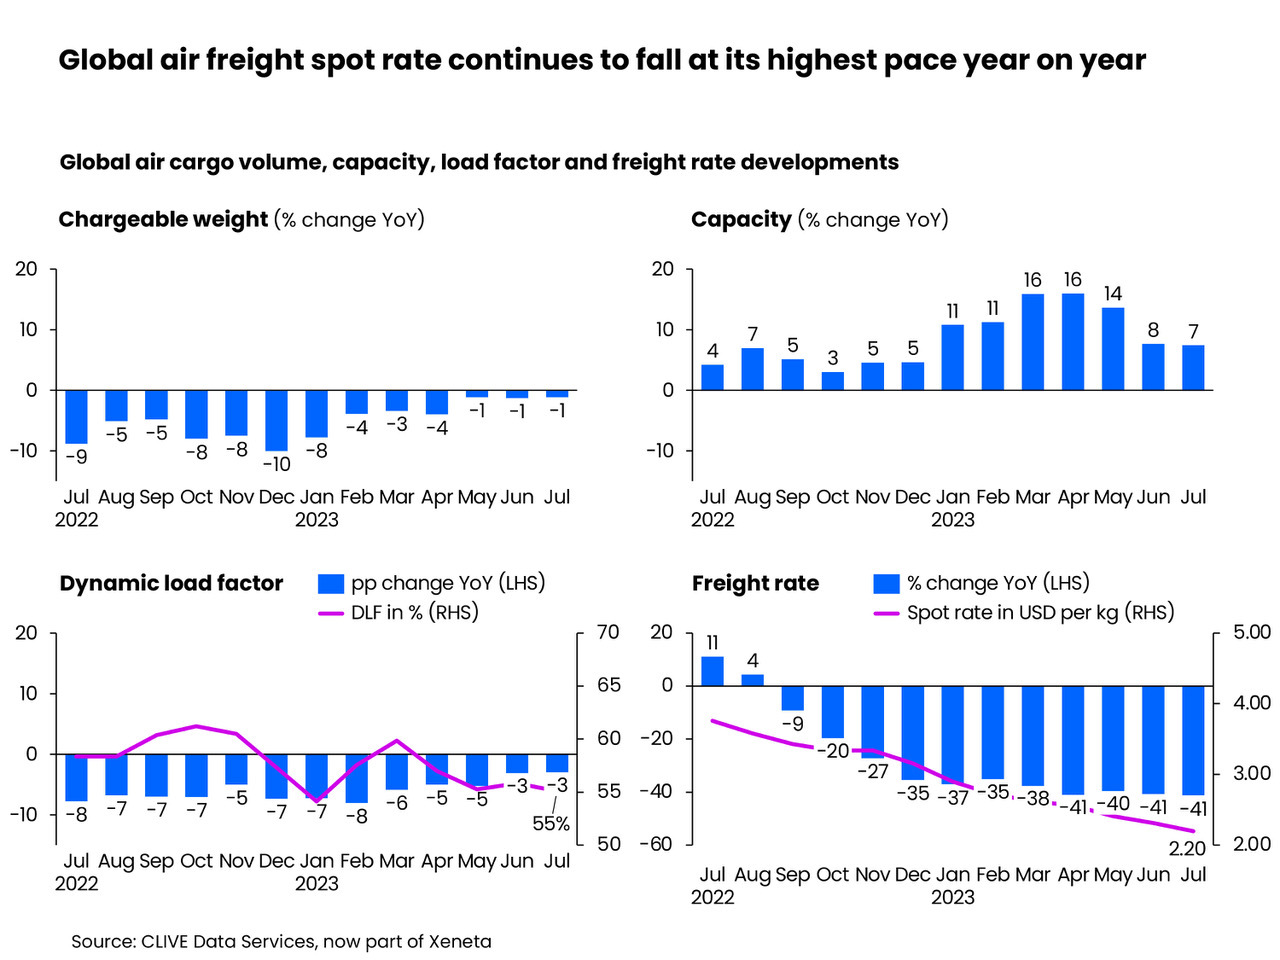 Global airfreight spot rate continues to fall at its highest pace year-on-year